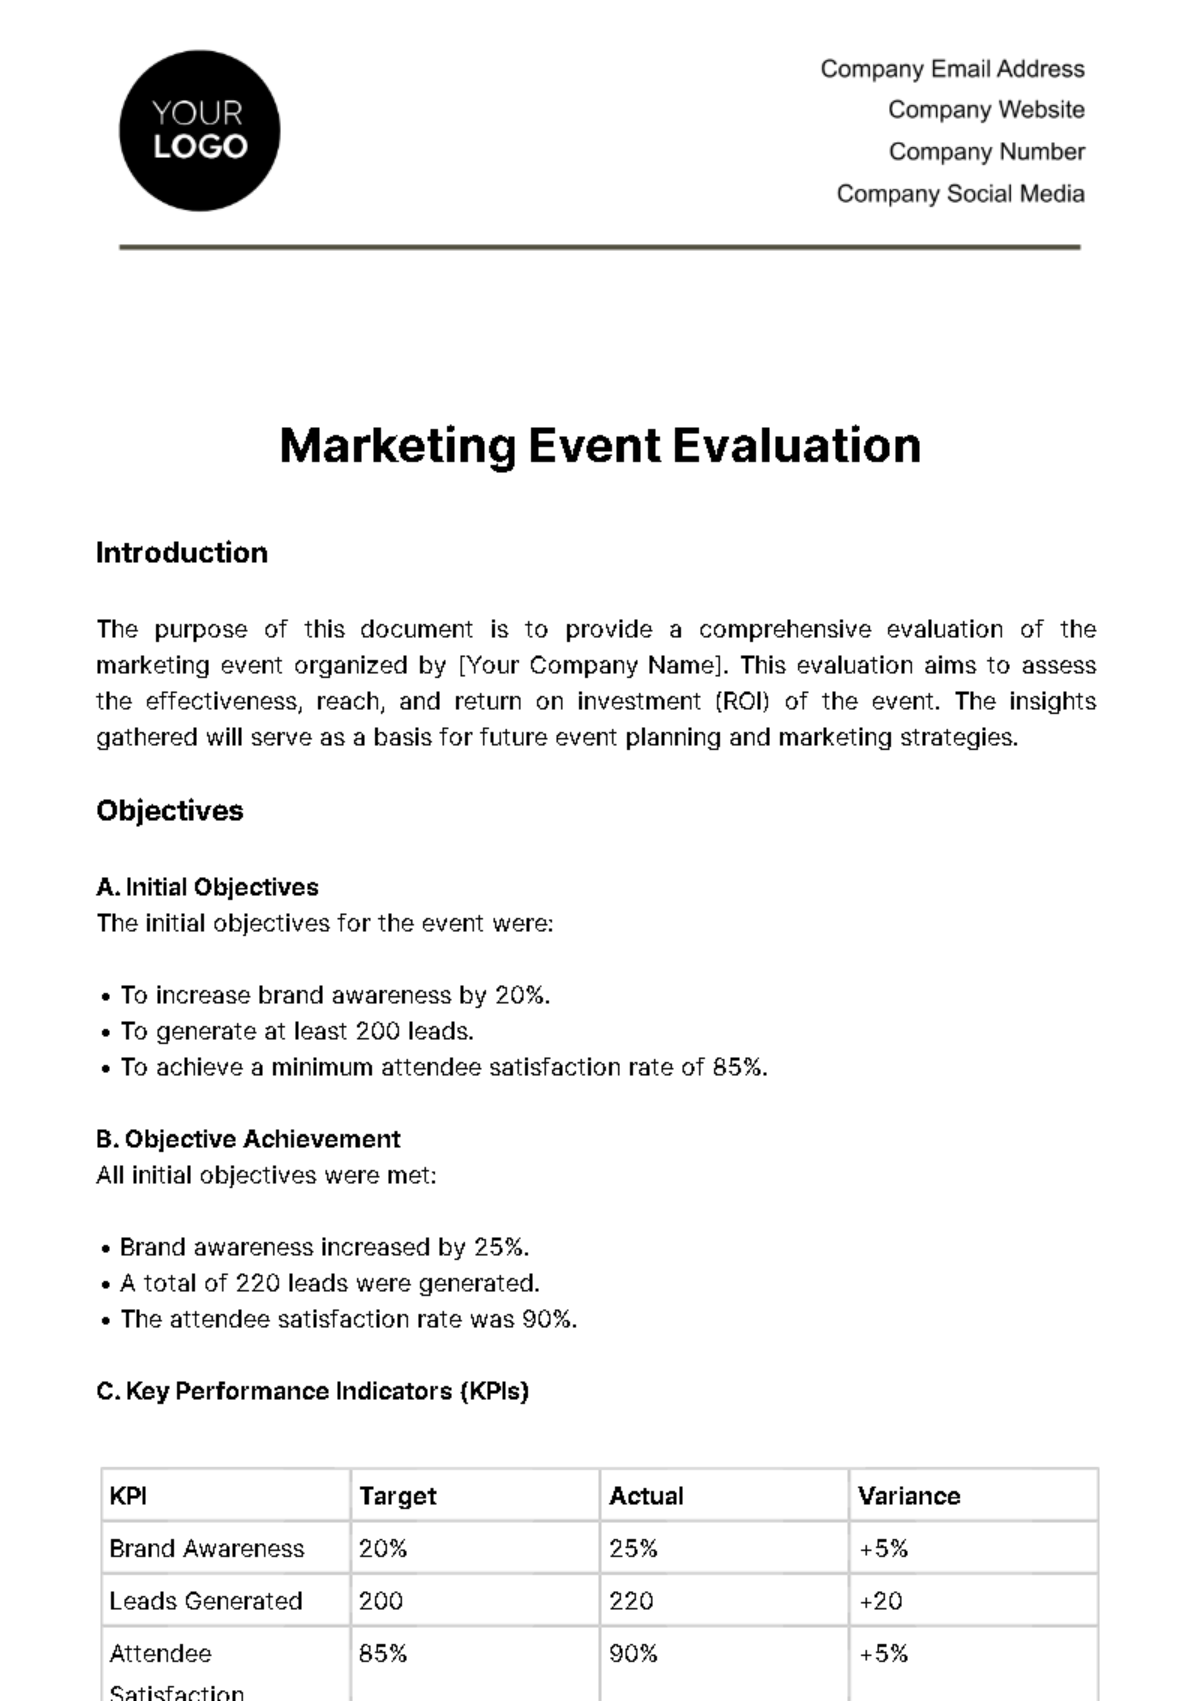 Free Marketing Event Evaluation Template